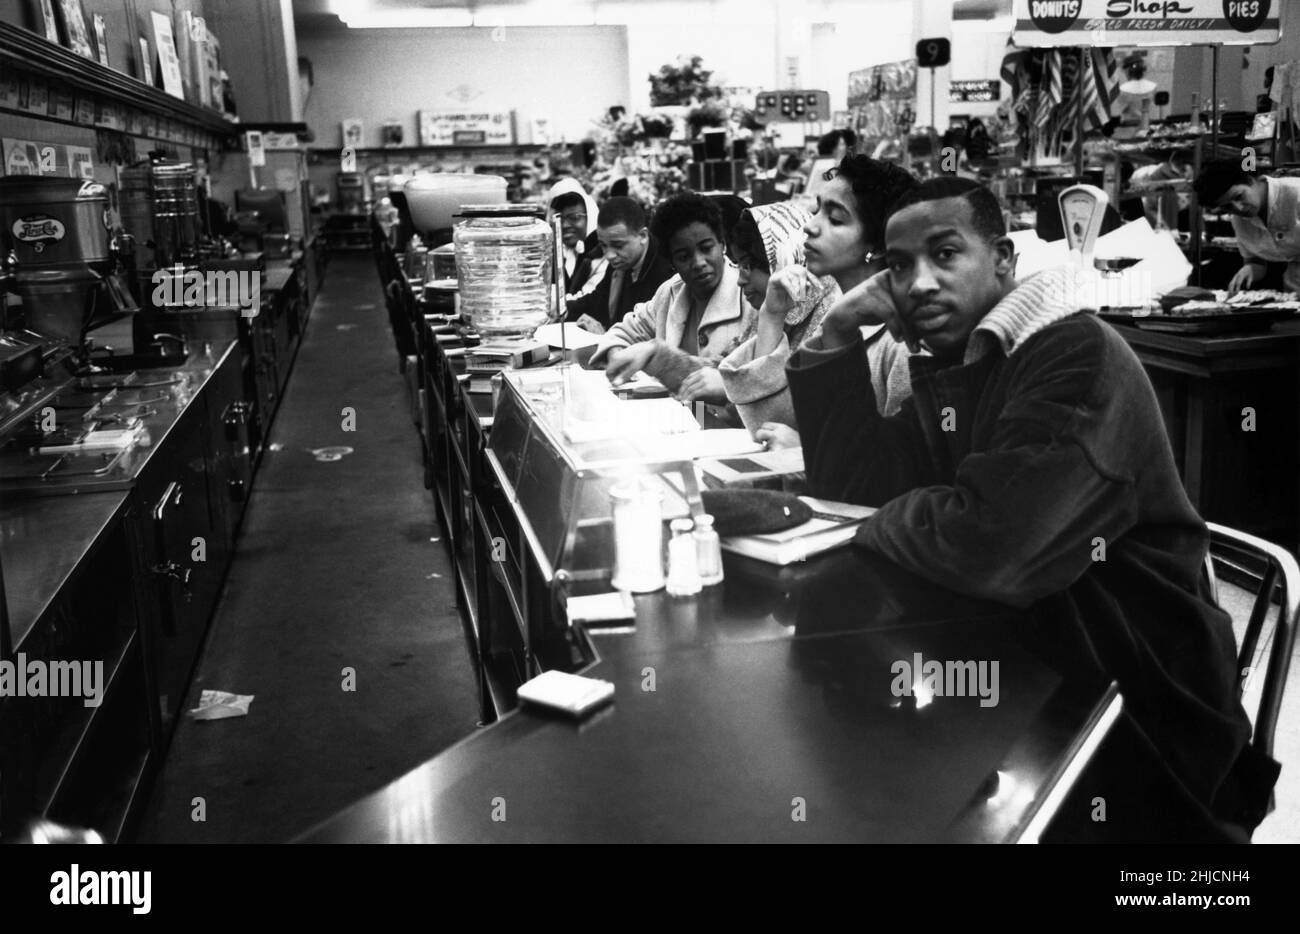 February 9, 1960, Charlotte, NC. The very first sit-in took place a week earlier in Greensboro, NC. The Charlotte sit-in was not well covered at the time, but it marked the fact that what had happened in Greensboro was spreading to other Southern cities. It was the college students from Johnson C. Smith University who took park in the sit-ins. These students also started picketing a downtown theatre to allow blacks to sit downstairs in the theater. The sit-ins had taken store management by surprise; Stock Photo